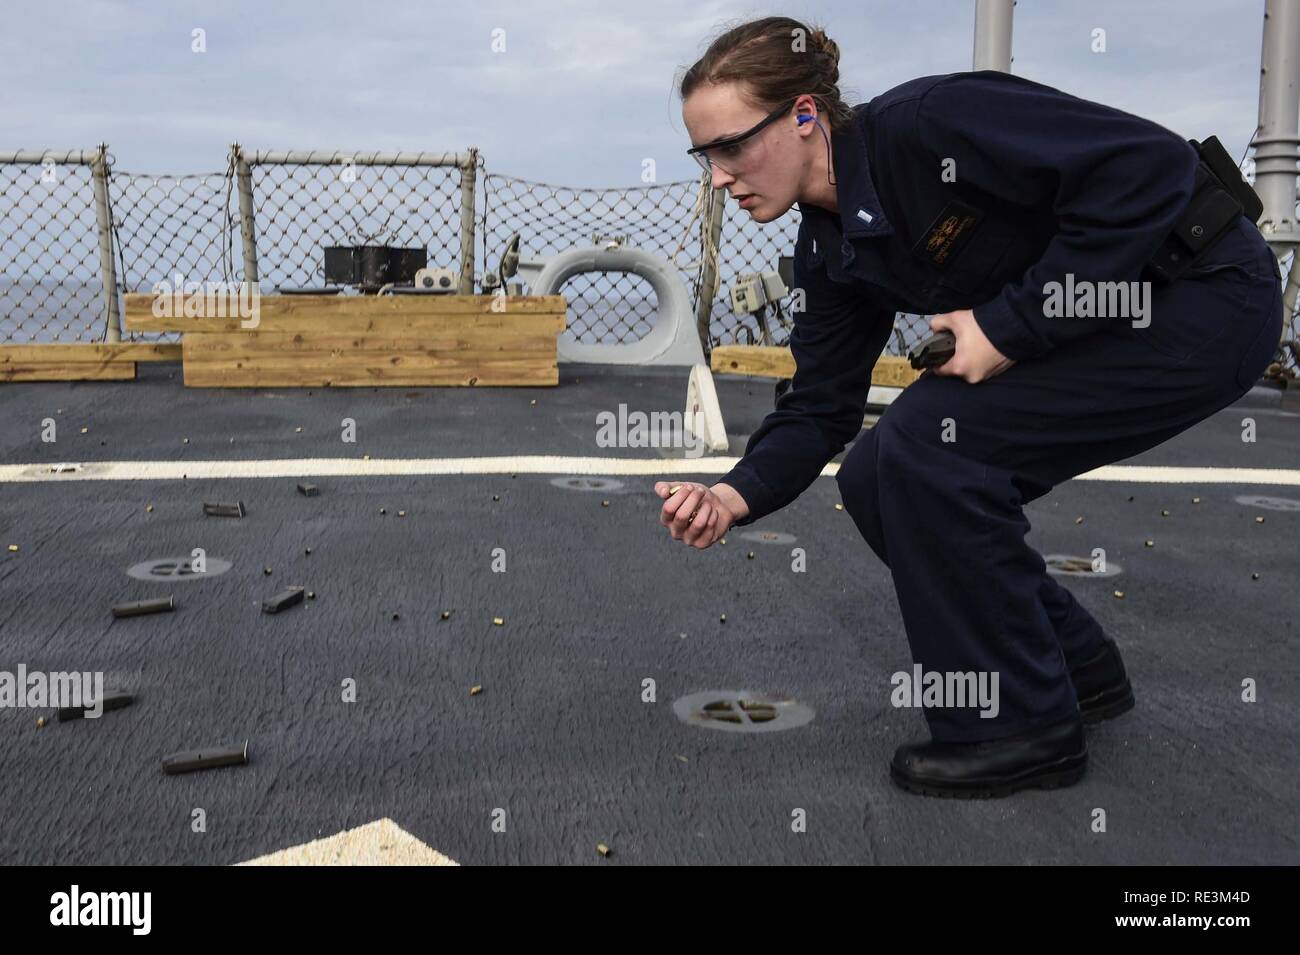 EDITERRANEAN SEA (Nov. 14, 2016) Lt. j.g Danielle Garbarino from Vail, Colo., polices her brass during a small arms shoot aboard USS Ross (DDG 71) Nov. 14, 2016.  Ross, an Arleigh Burke-class guided-missile destroyer, forward-deployed to Rota, Spain, is conducting naval operations in the U.S. 6th Fleet area of operations in support of U.S. national security interests in Europe and Africa. Stock Photo